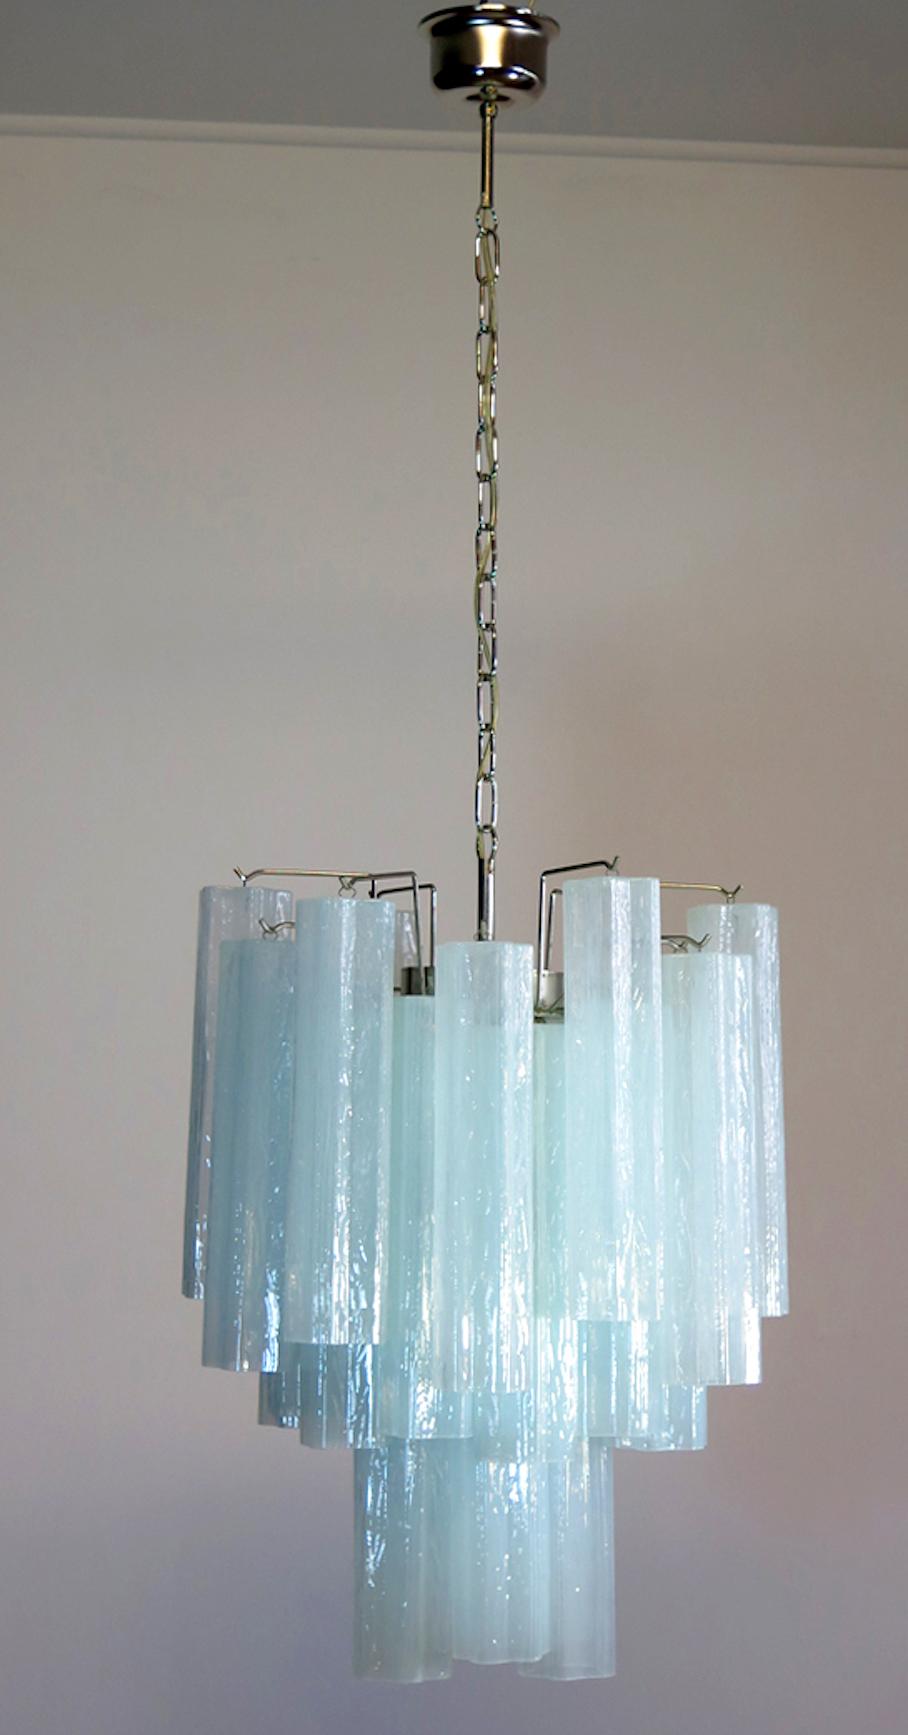 Late 20th Century Pair of 30 Tronchi Chandeliers in Toni Zuccheri Style for Venini, Murano For Sale